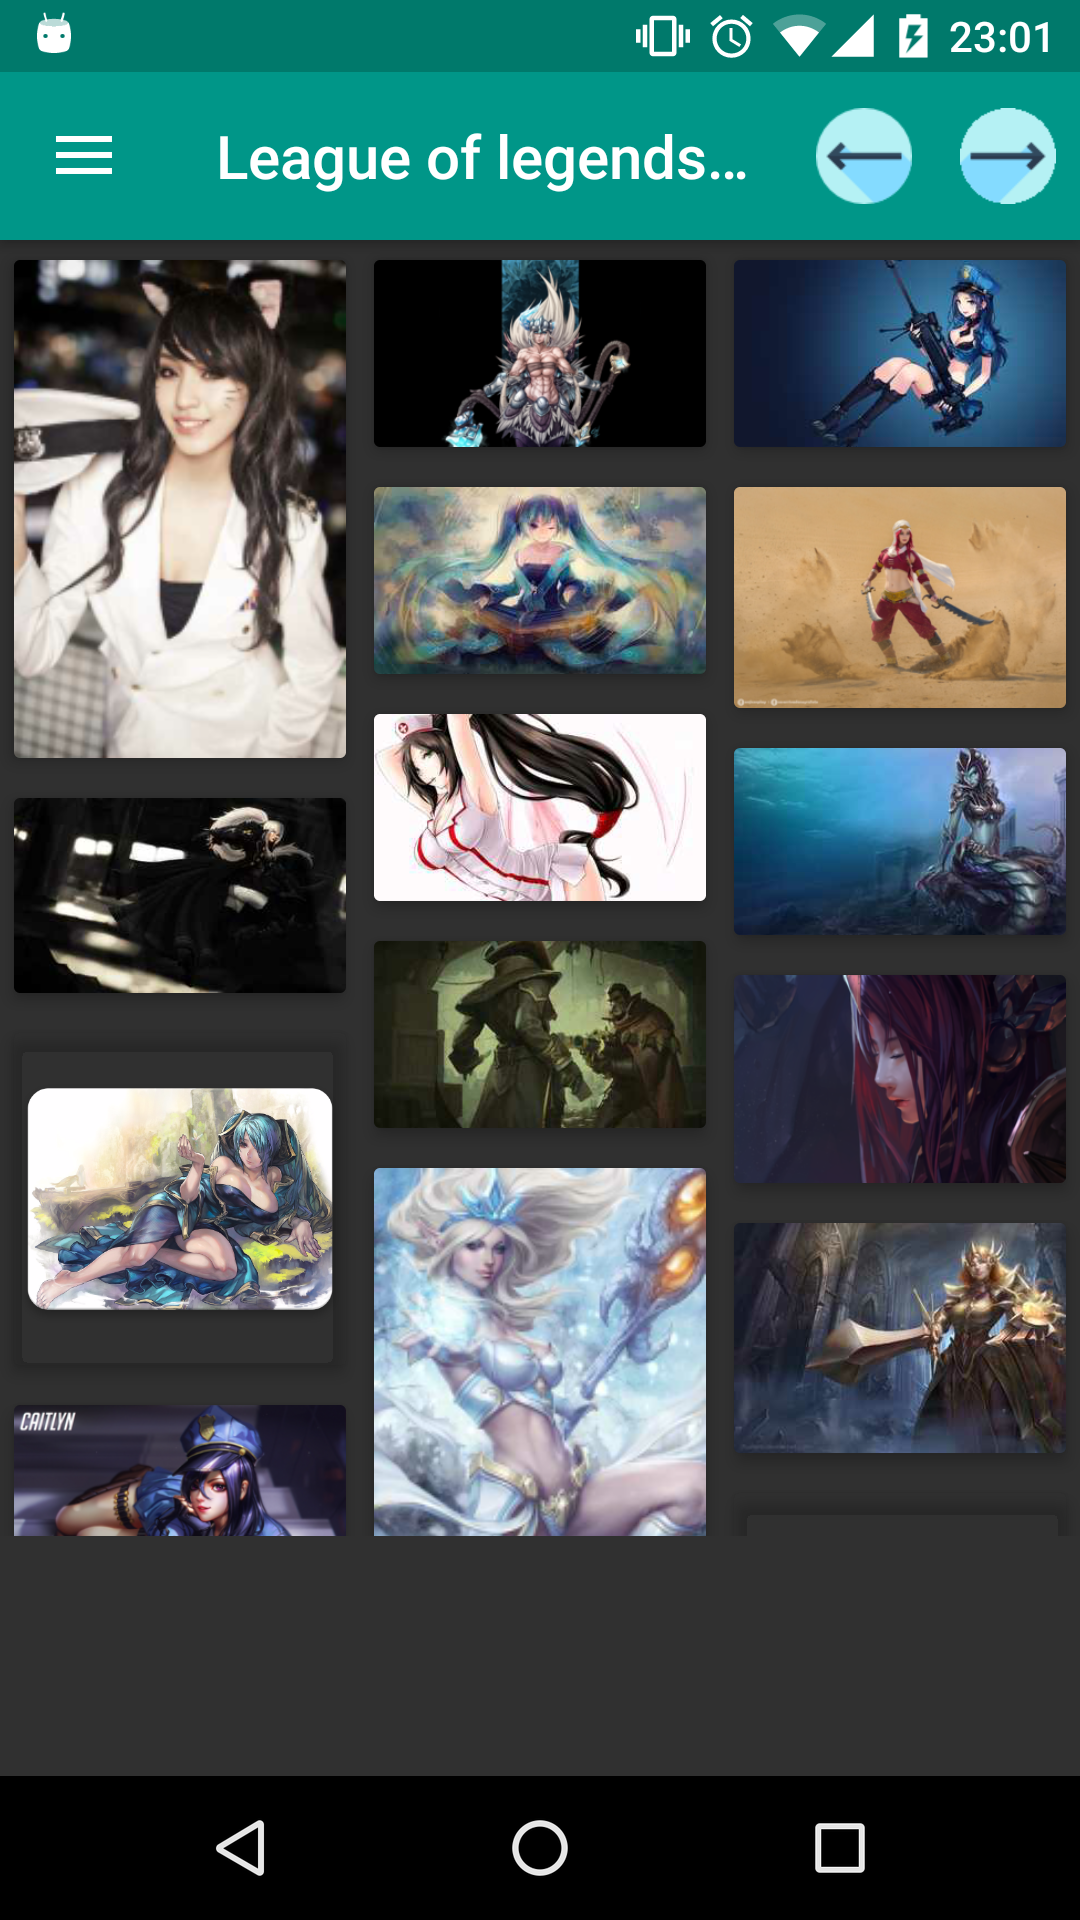 League of Legends wallpapers titty,pics,adult,pic,backgrounds,app,panties,downloading,porn,download,تطبيق,صور,sex,images,apps,هنتاي,apk,hentai,wallpapers,sexy,league,erotica,tuesday,photo,wallpaper,free,legends